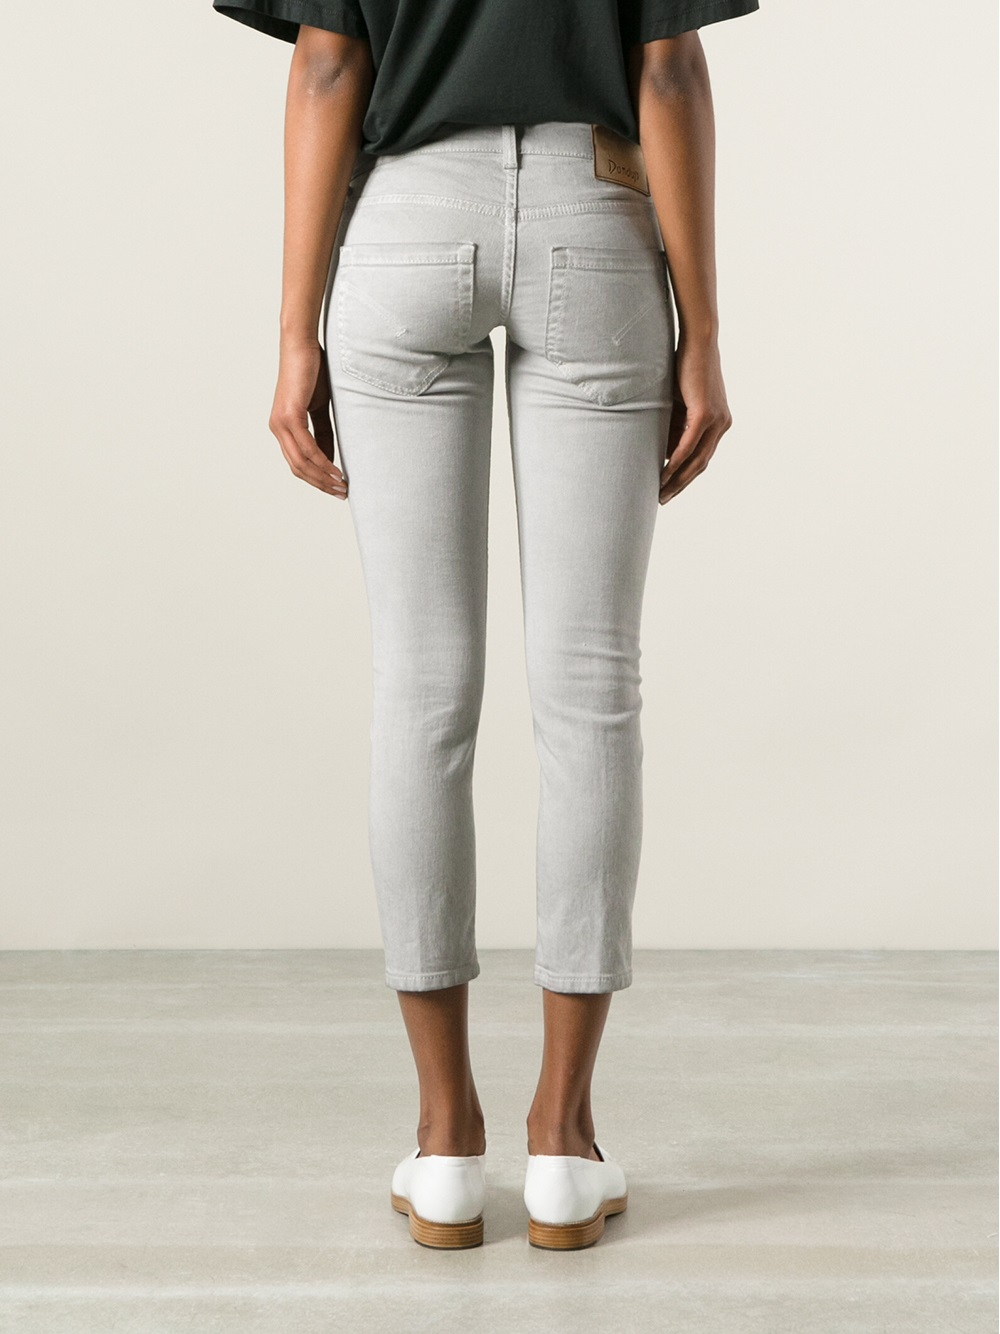 Lyst - Dondup Cropped Skinny Jeans in Gray